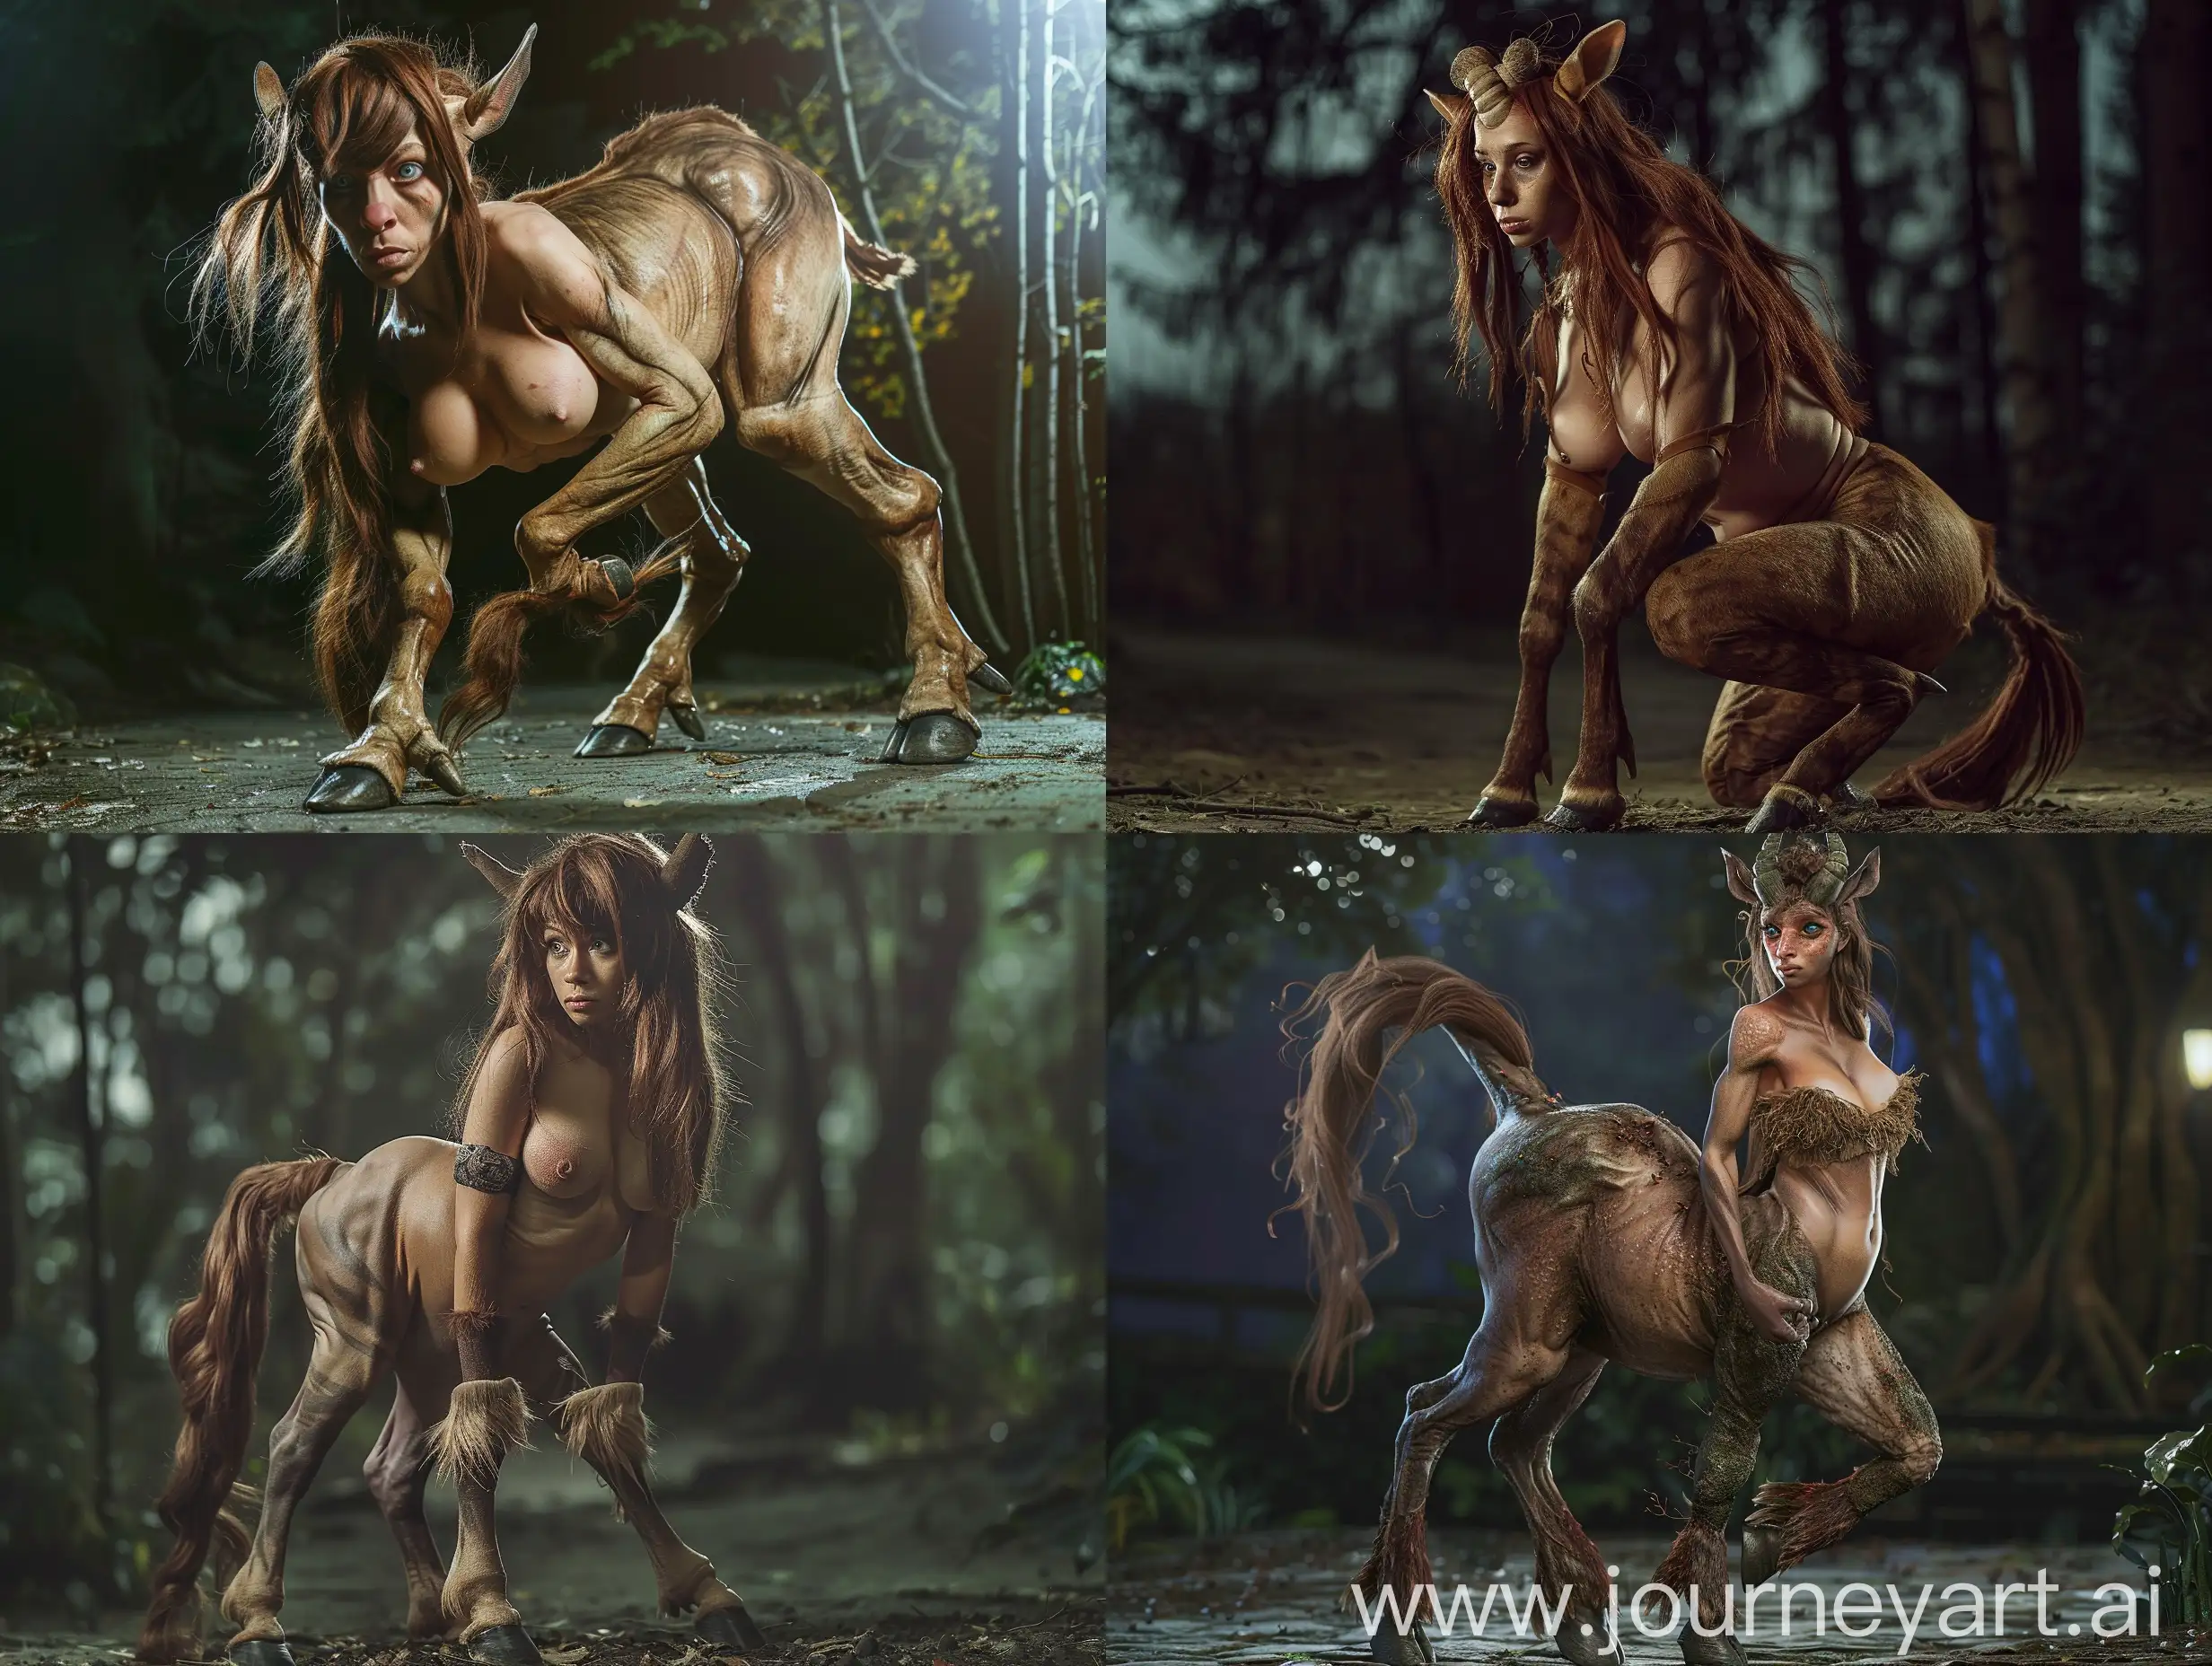 Enchanting-Night-Scene-Realistic-Photograph-of-a-Graceful-Female-Centaur-in-a-Forest